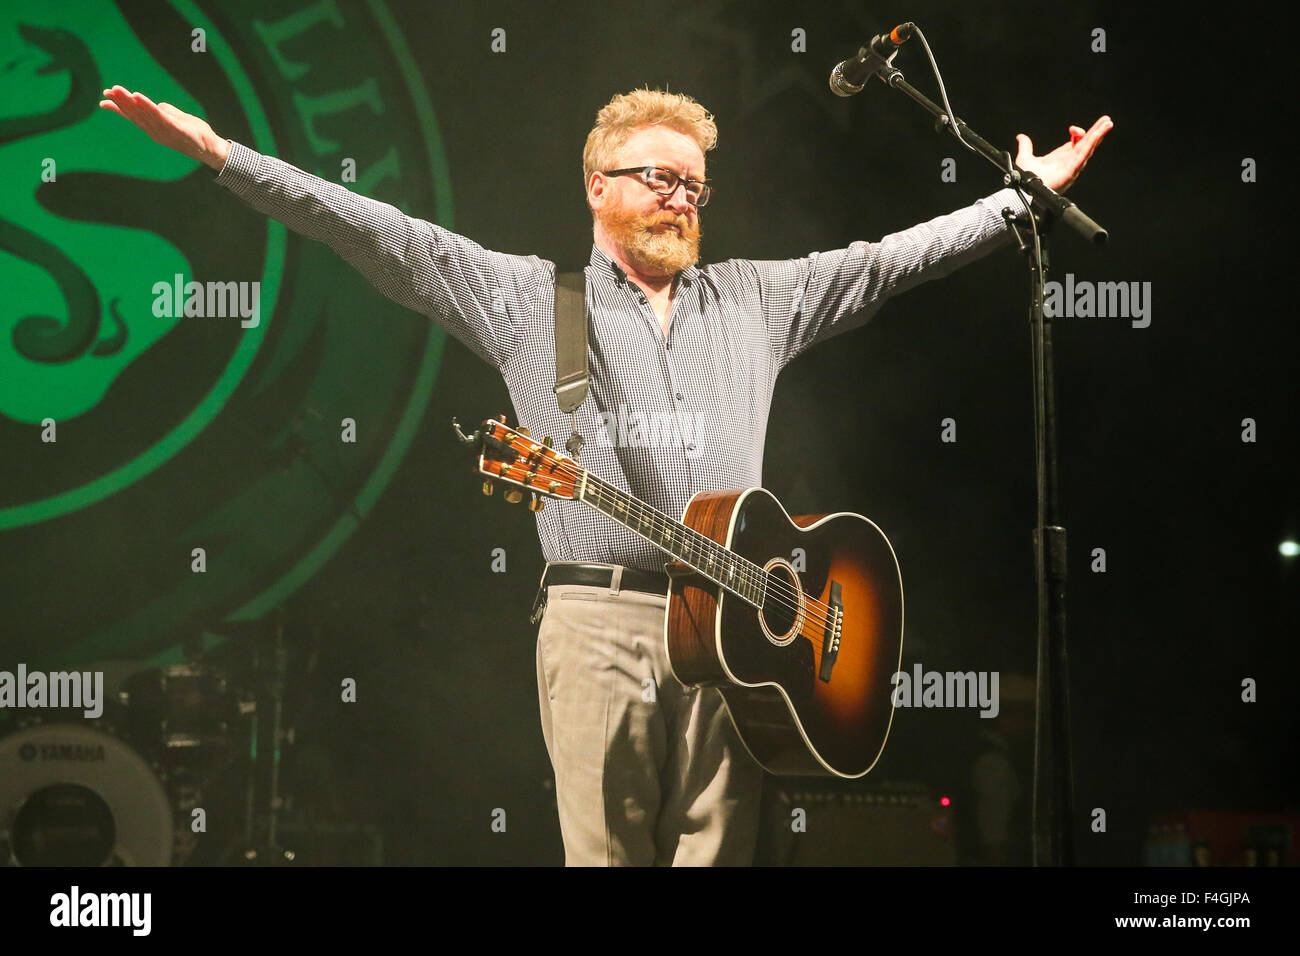 Music Artist FLOGGING MOLLY performs at the Red Hat Amphitheater in North Carolina.  Flogging Molly is an American seven-piece Irish punk band from Los Angeles, California led by Irish vocalist Dave King, known for his work with Fastway. They are signed to their own record label, Borstal Beat Records. Stock Photo